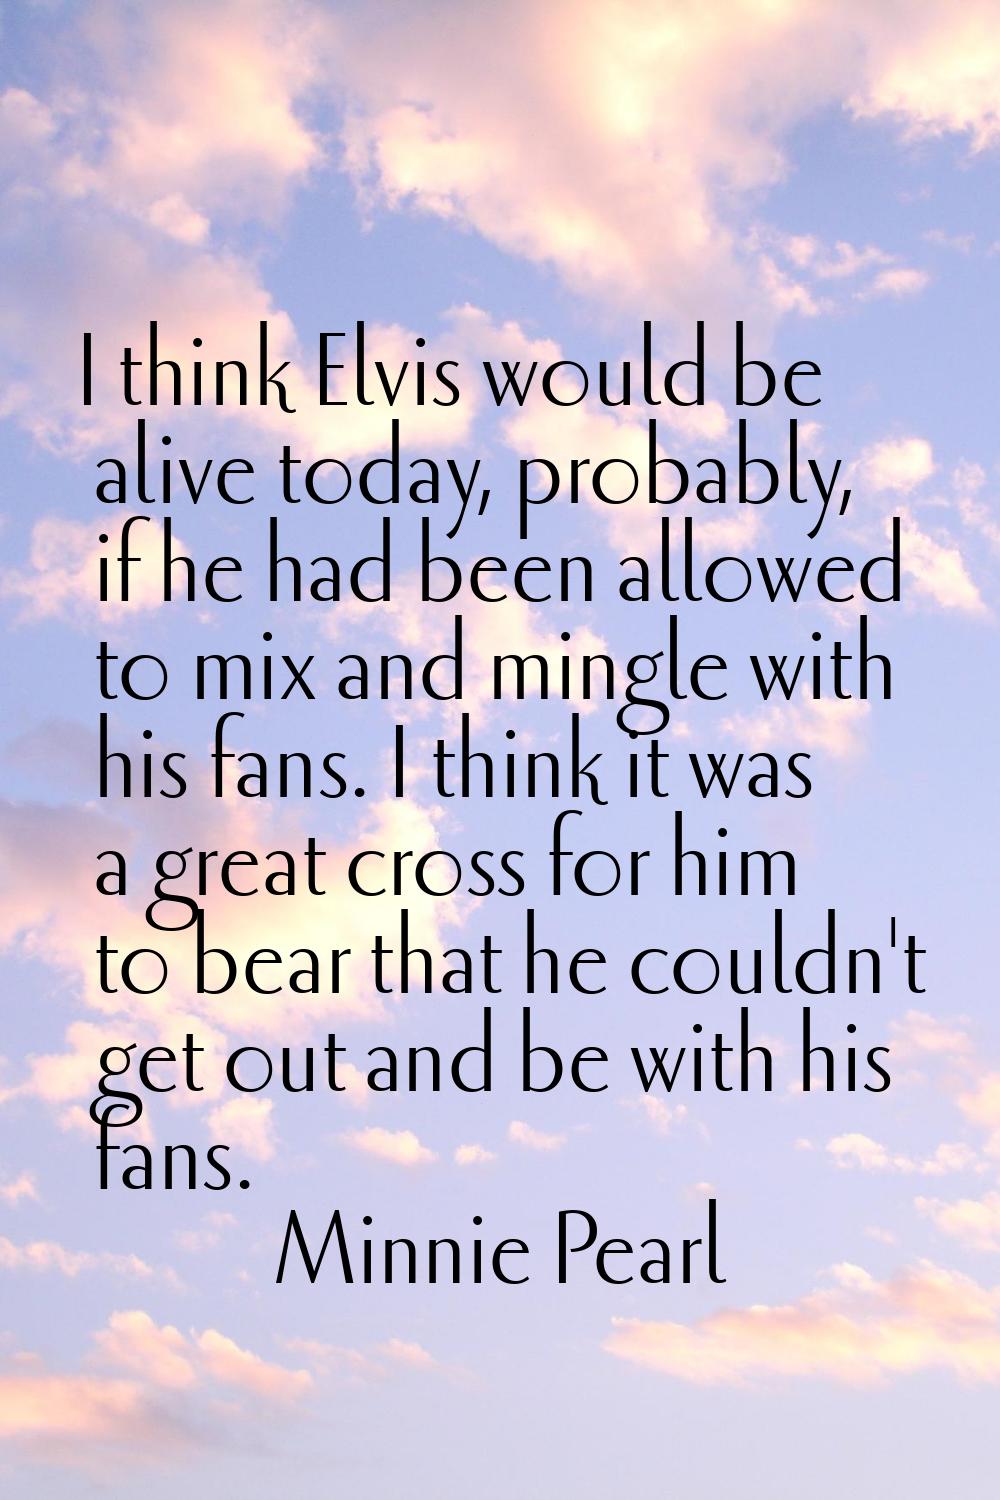 I think Elvis would be alive today, probably, if he had been allowed to mix and mingle with his fan